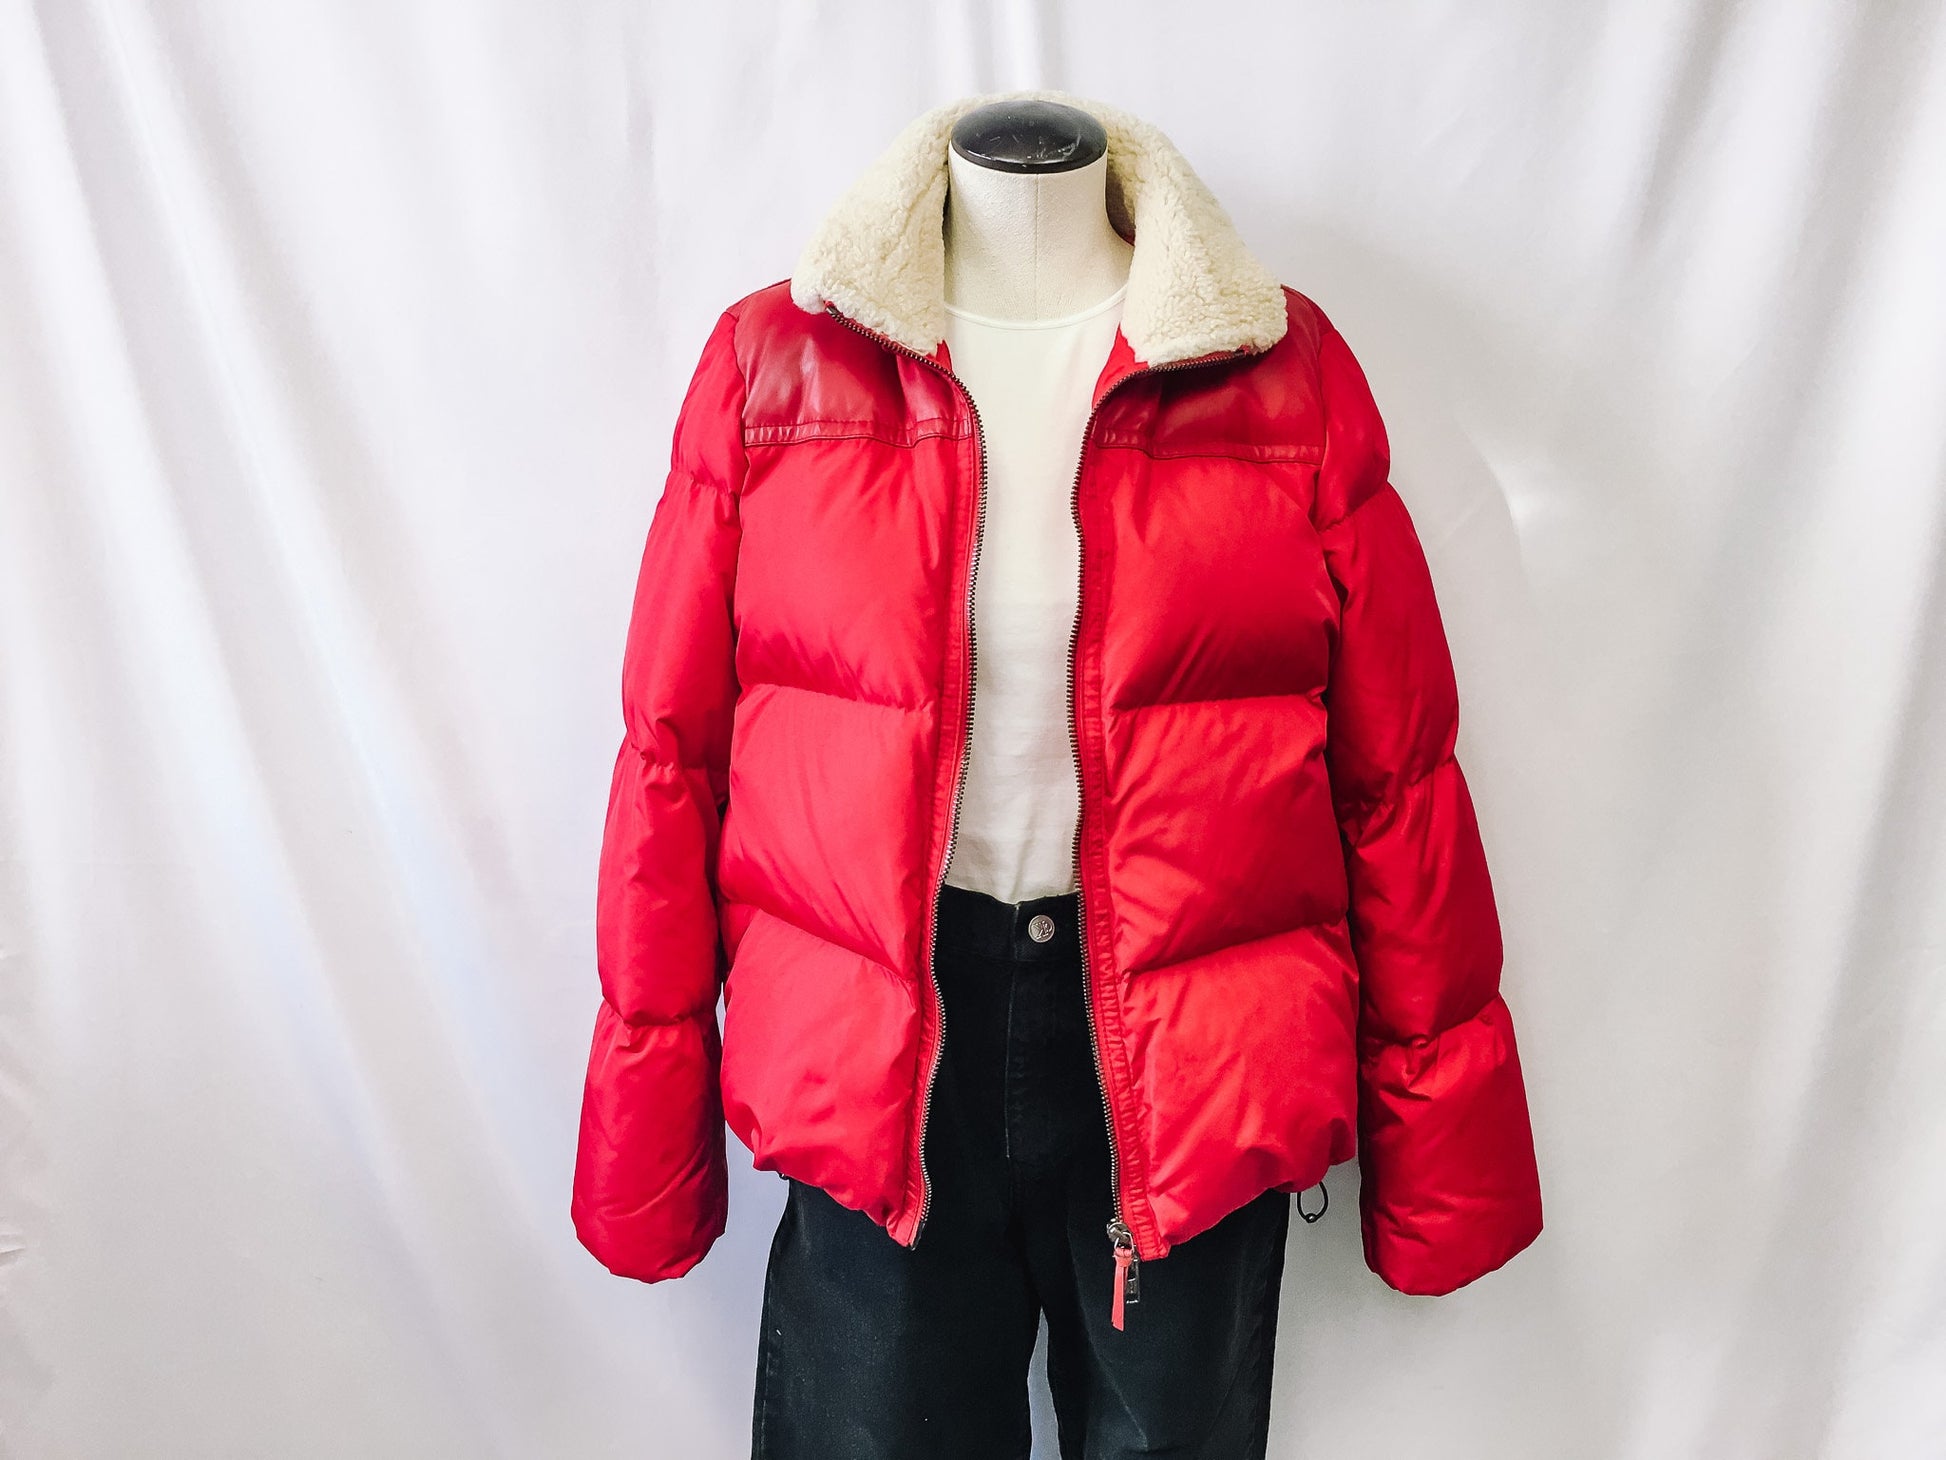 Vintage COACH Legacy Red Puffer Jacket With Double Zipper, Style #83124, Sz. L